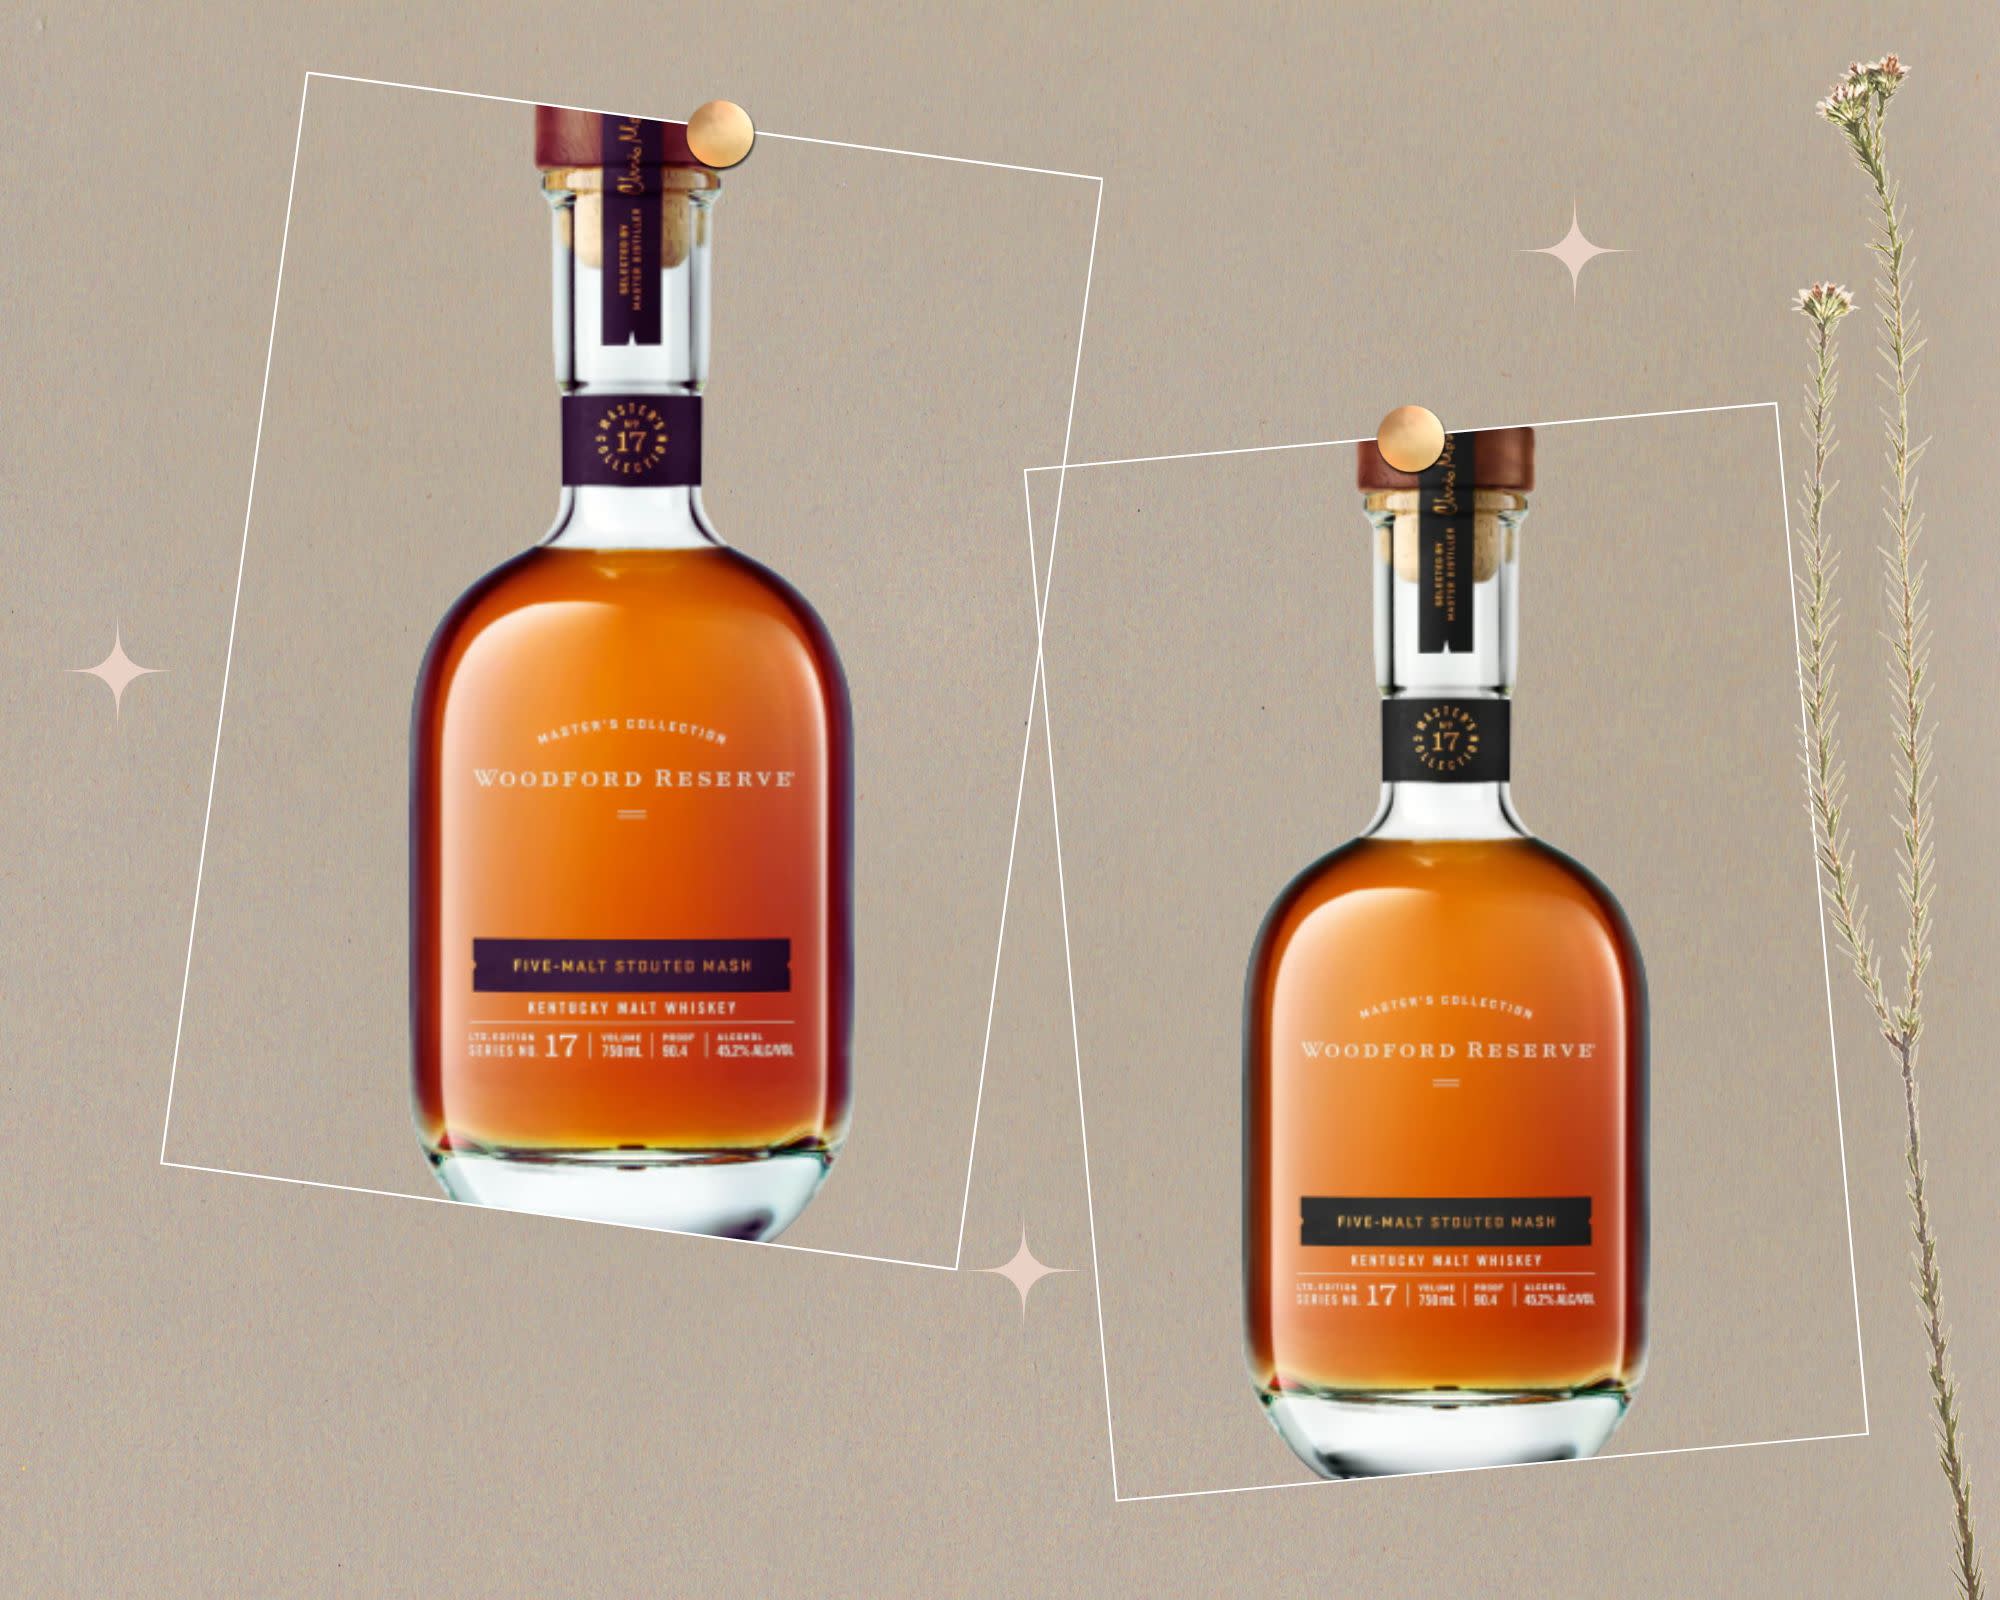 Master's Collection - Woodford Reserve